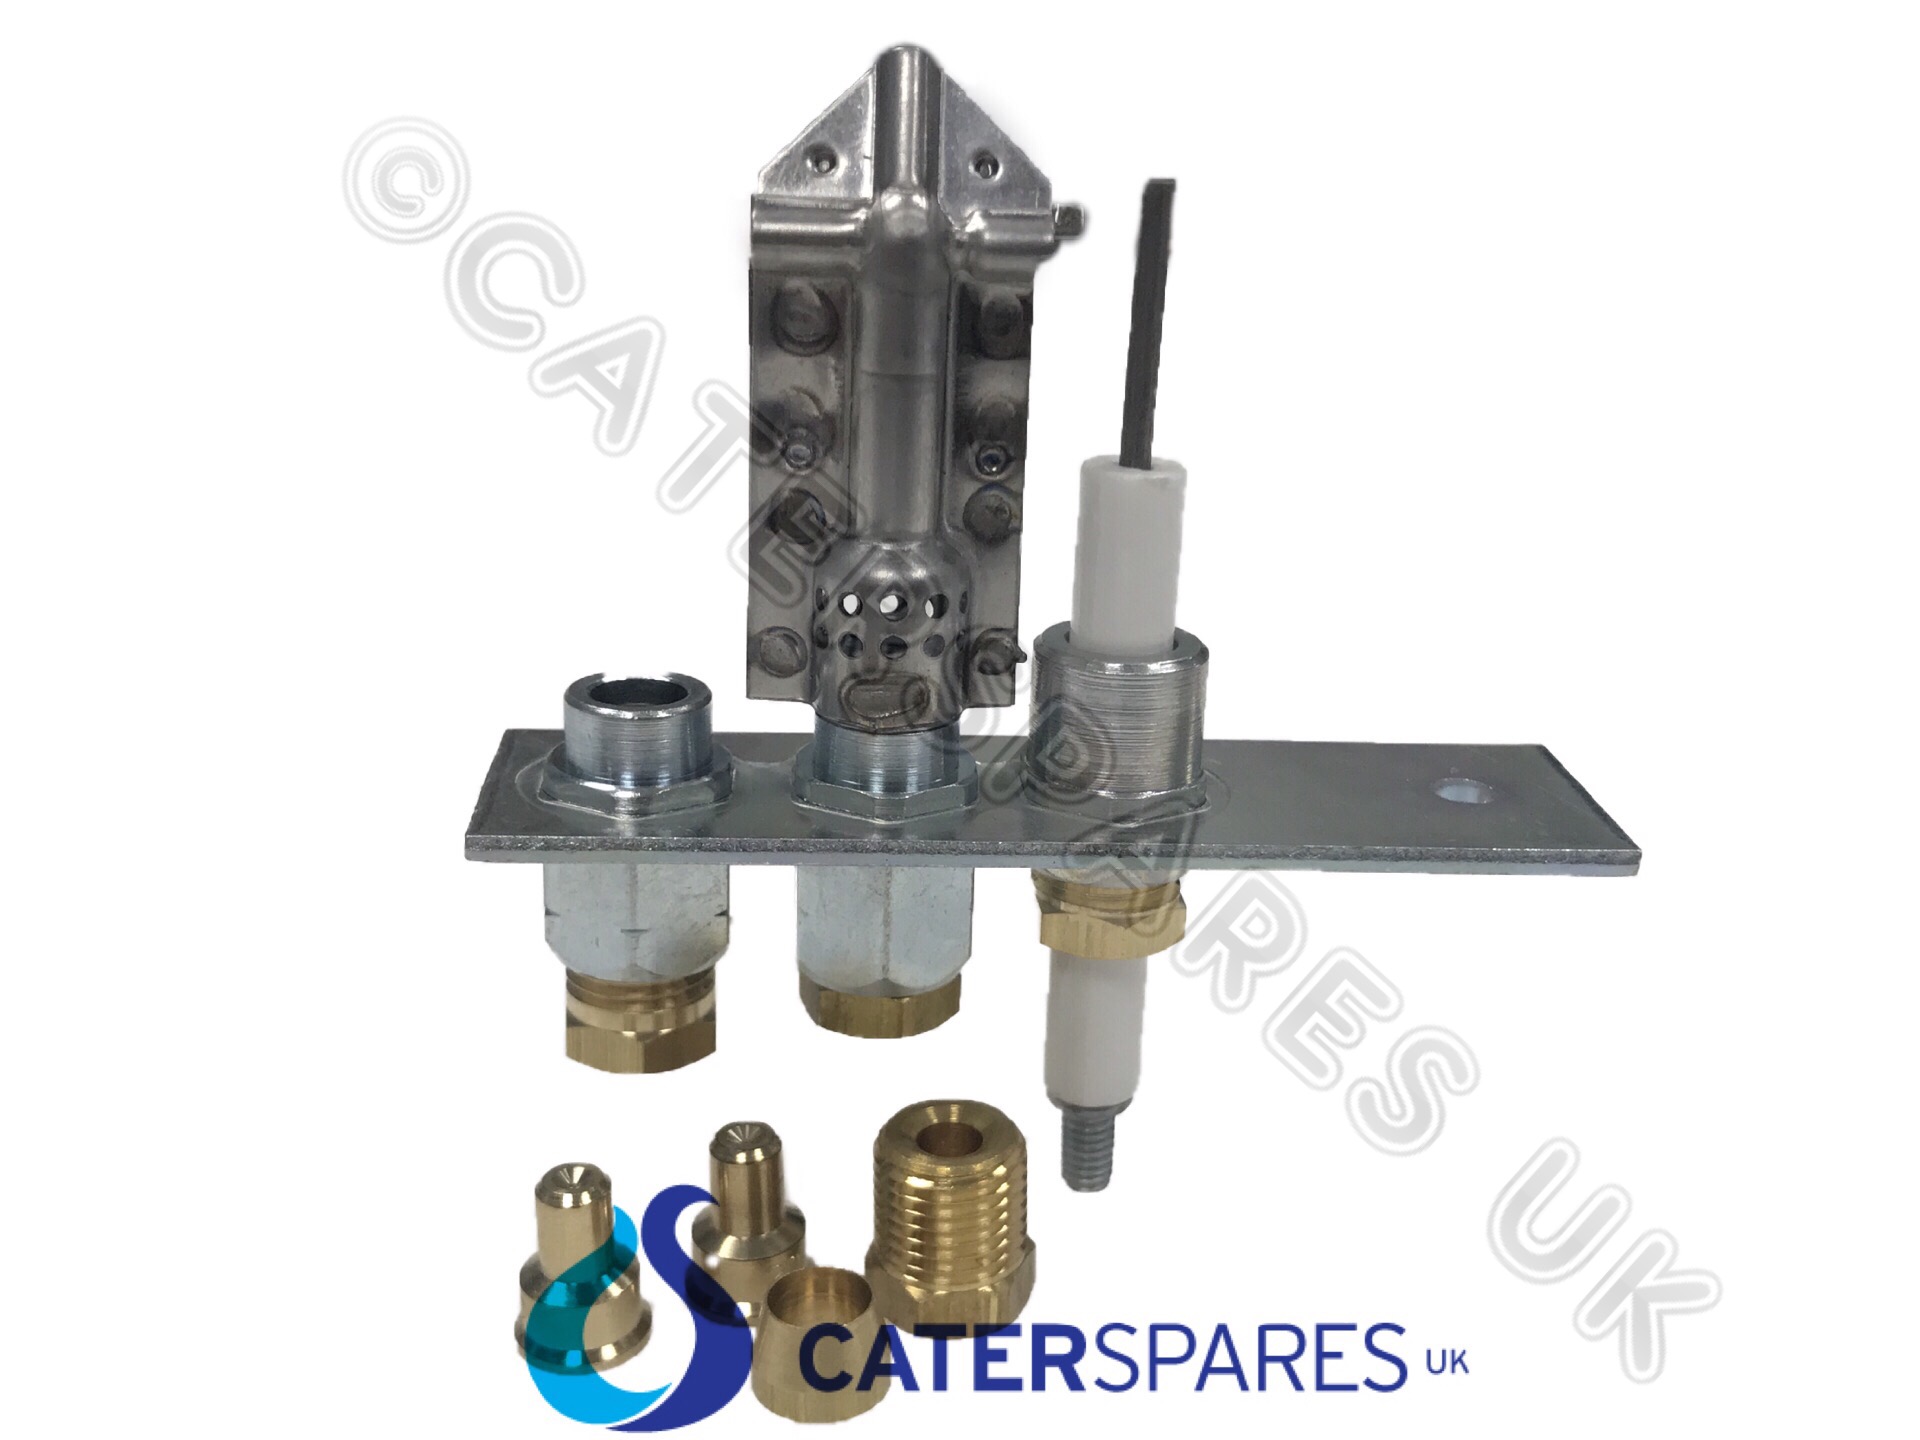 3 Way pilot light natural gas for chinese cooker 